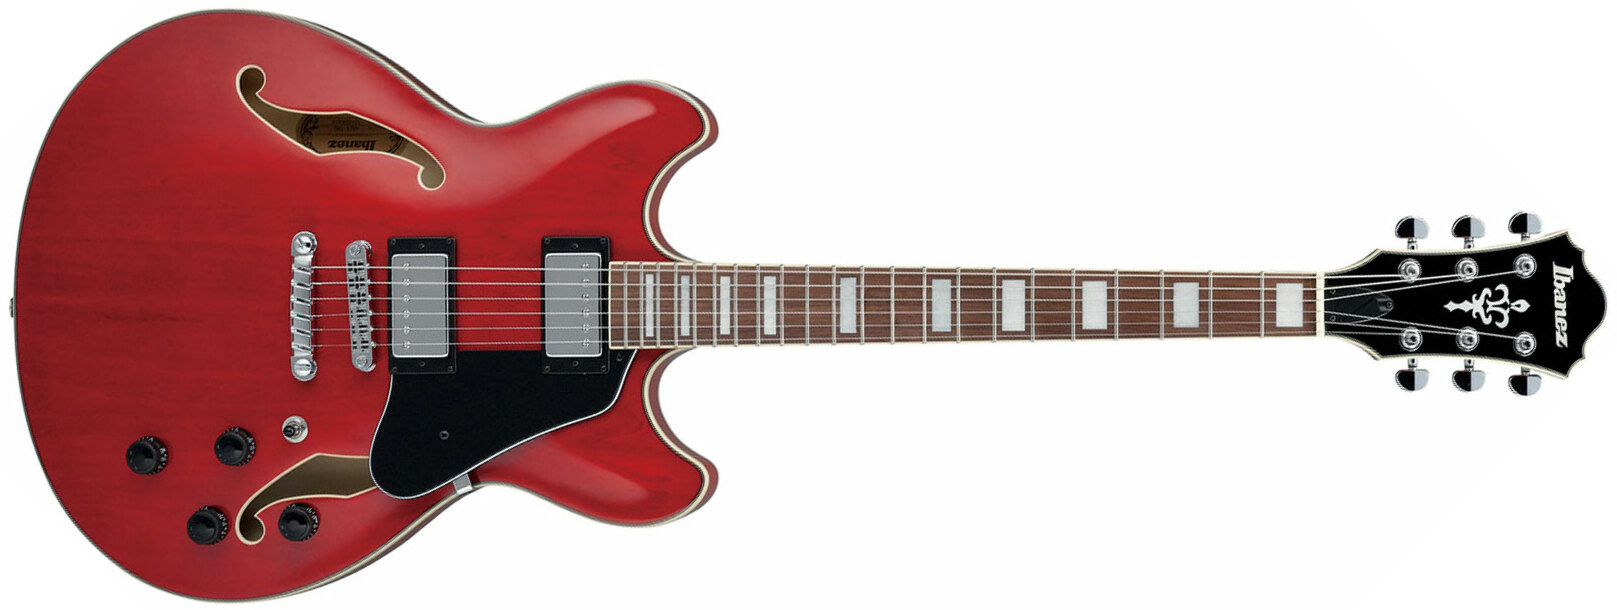 Ibanez As73 Tcd Artcore Hh Ht Noy - Transparent Cherry Red - Semi-hollow electric guitar - Main picture